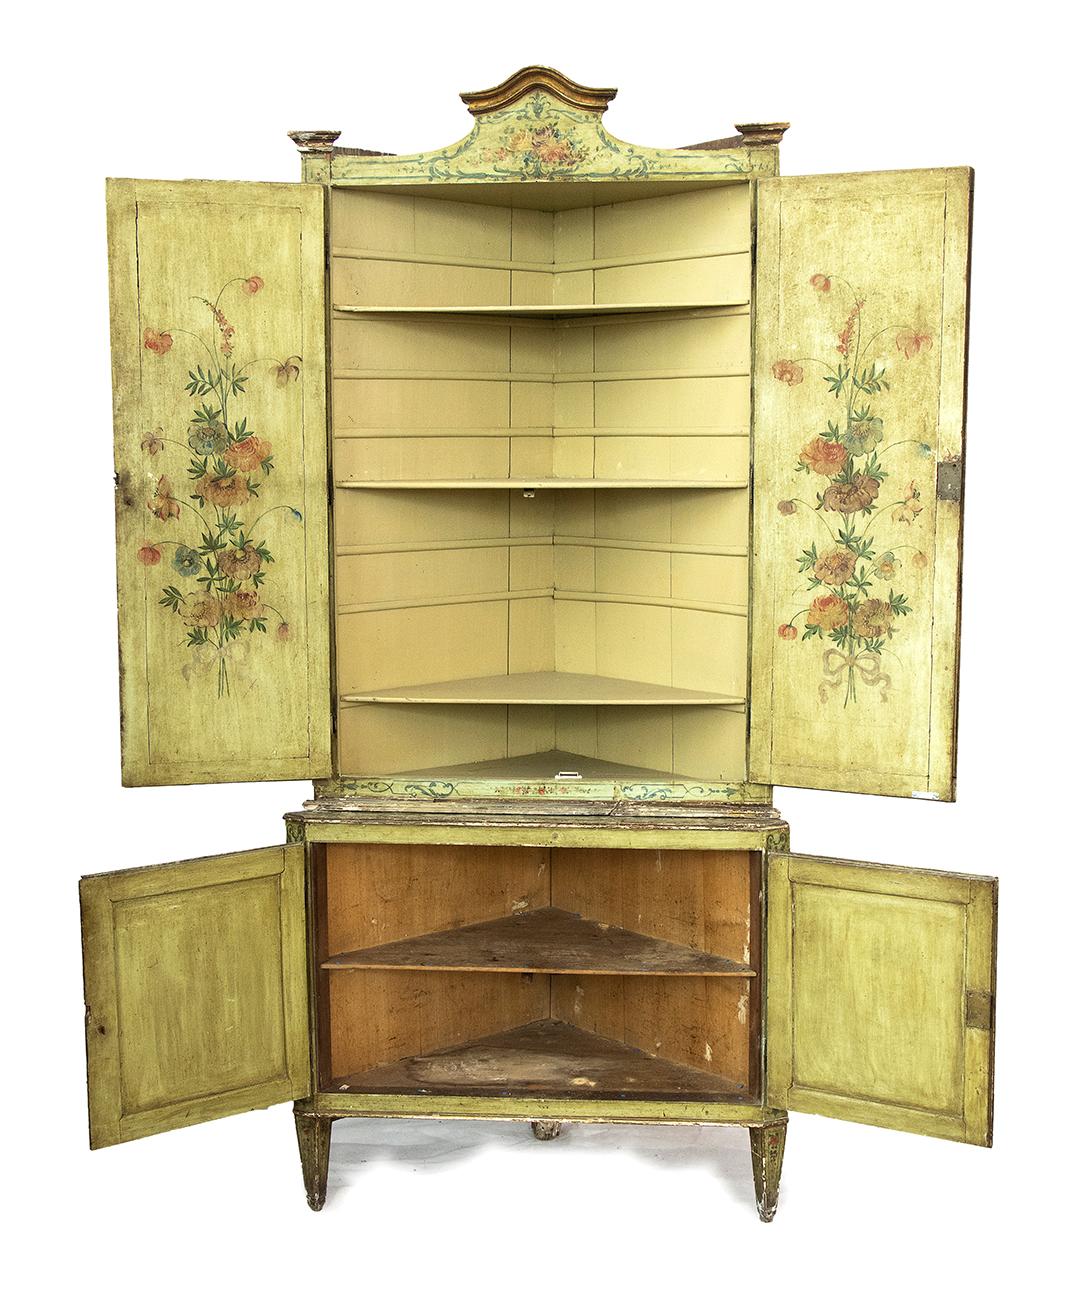 A rare and impressive Lacquered and painted Louis XV corner cupboards , city of Venice, 18th century ( 1740-1750 circa) still in patina.
Single-body with lacquered and painted truncated pyramid feet, has a double door at the top and bottom, painted